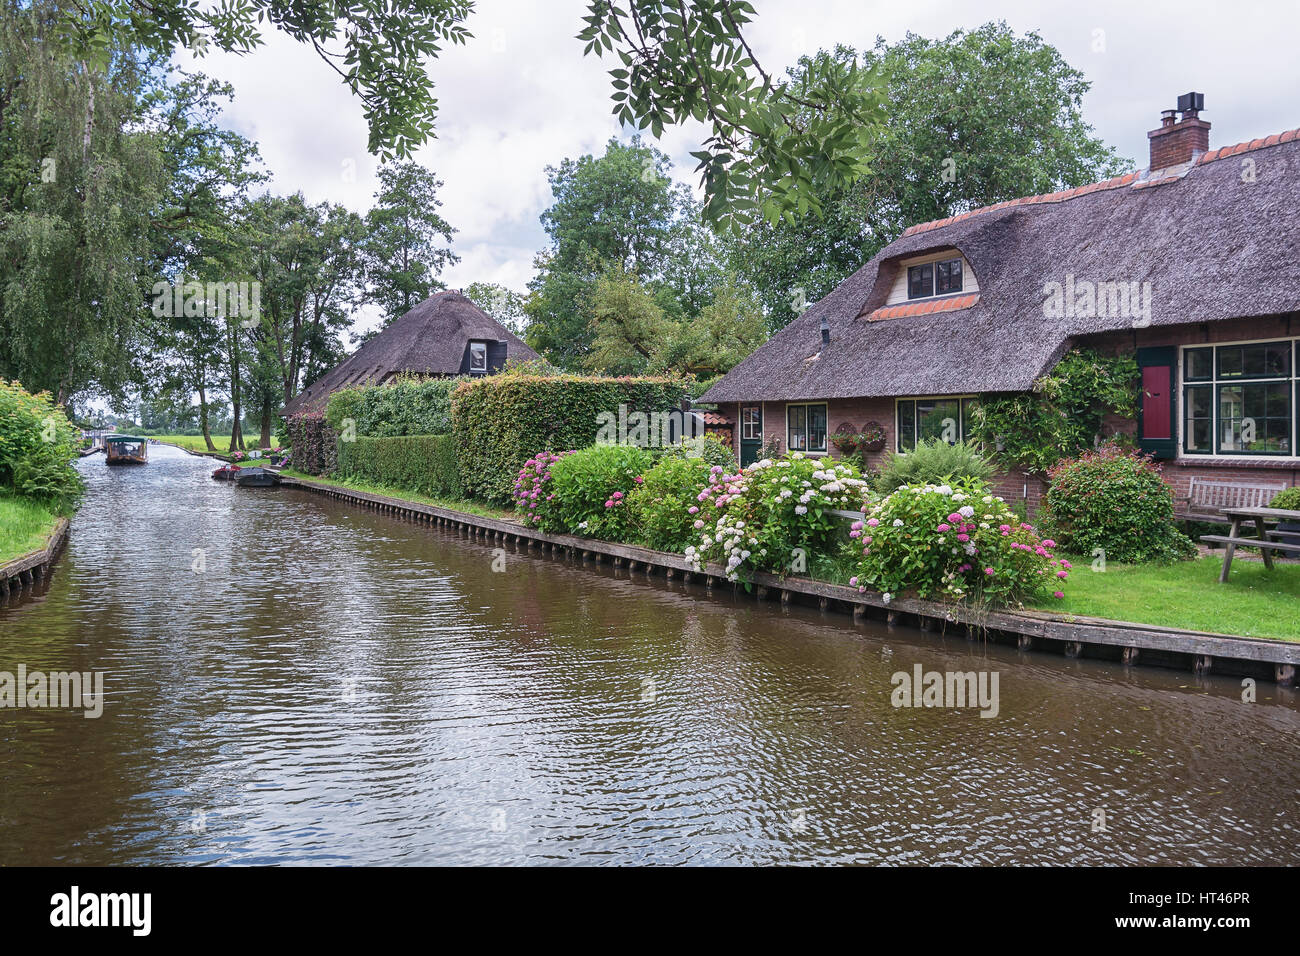 Giethoorn, Netherlands – June 29, 2016: View of a blooming garden in front of the house of the Dutch town Giethoorn. Stock Photo